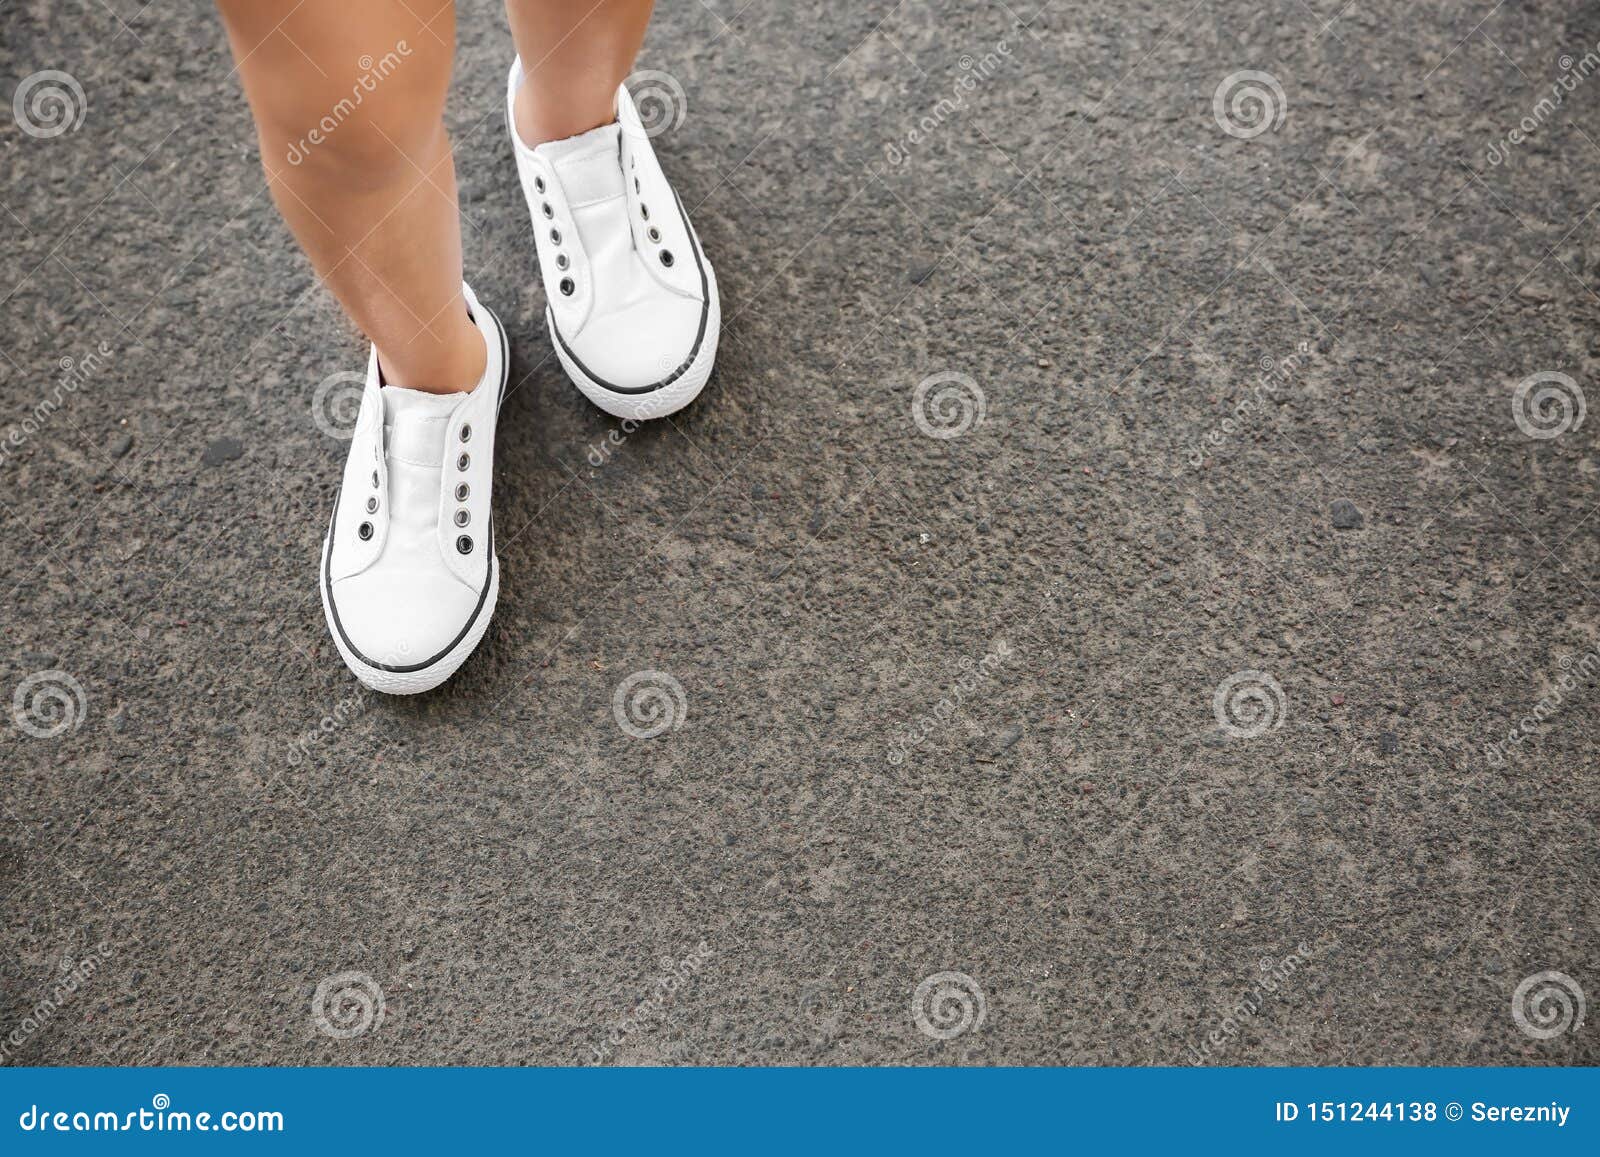 Legs of Girl Wearing Casual Shoes Outdoors Stock Photo - Image of pair ...